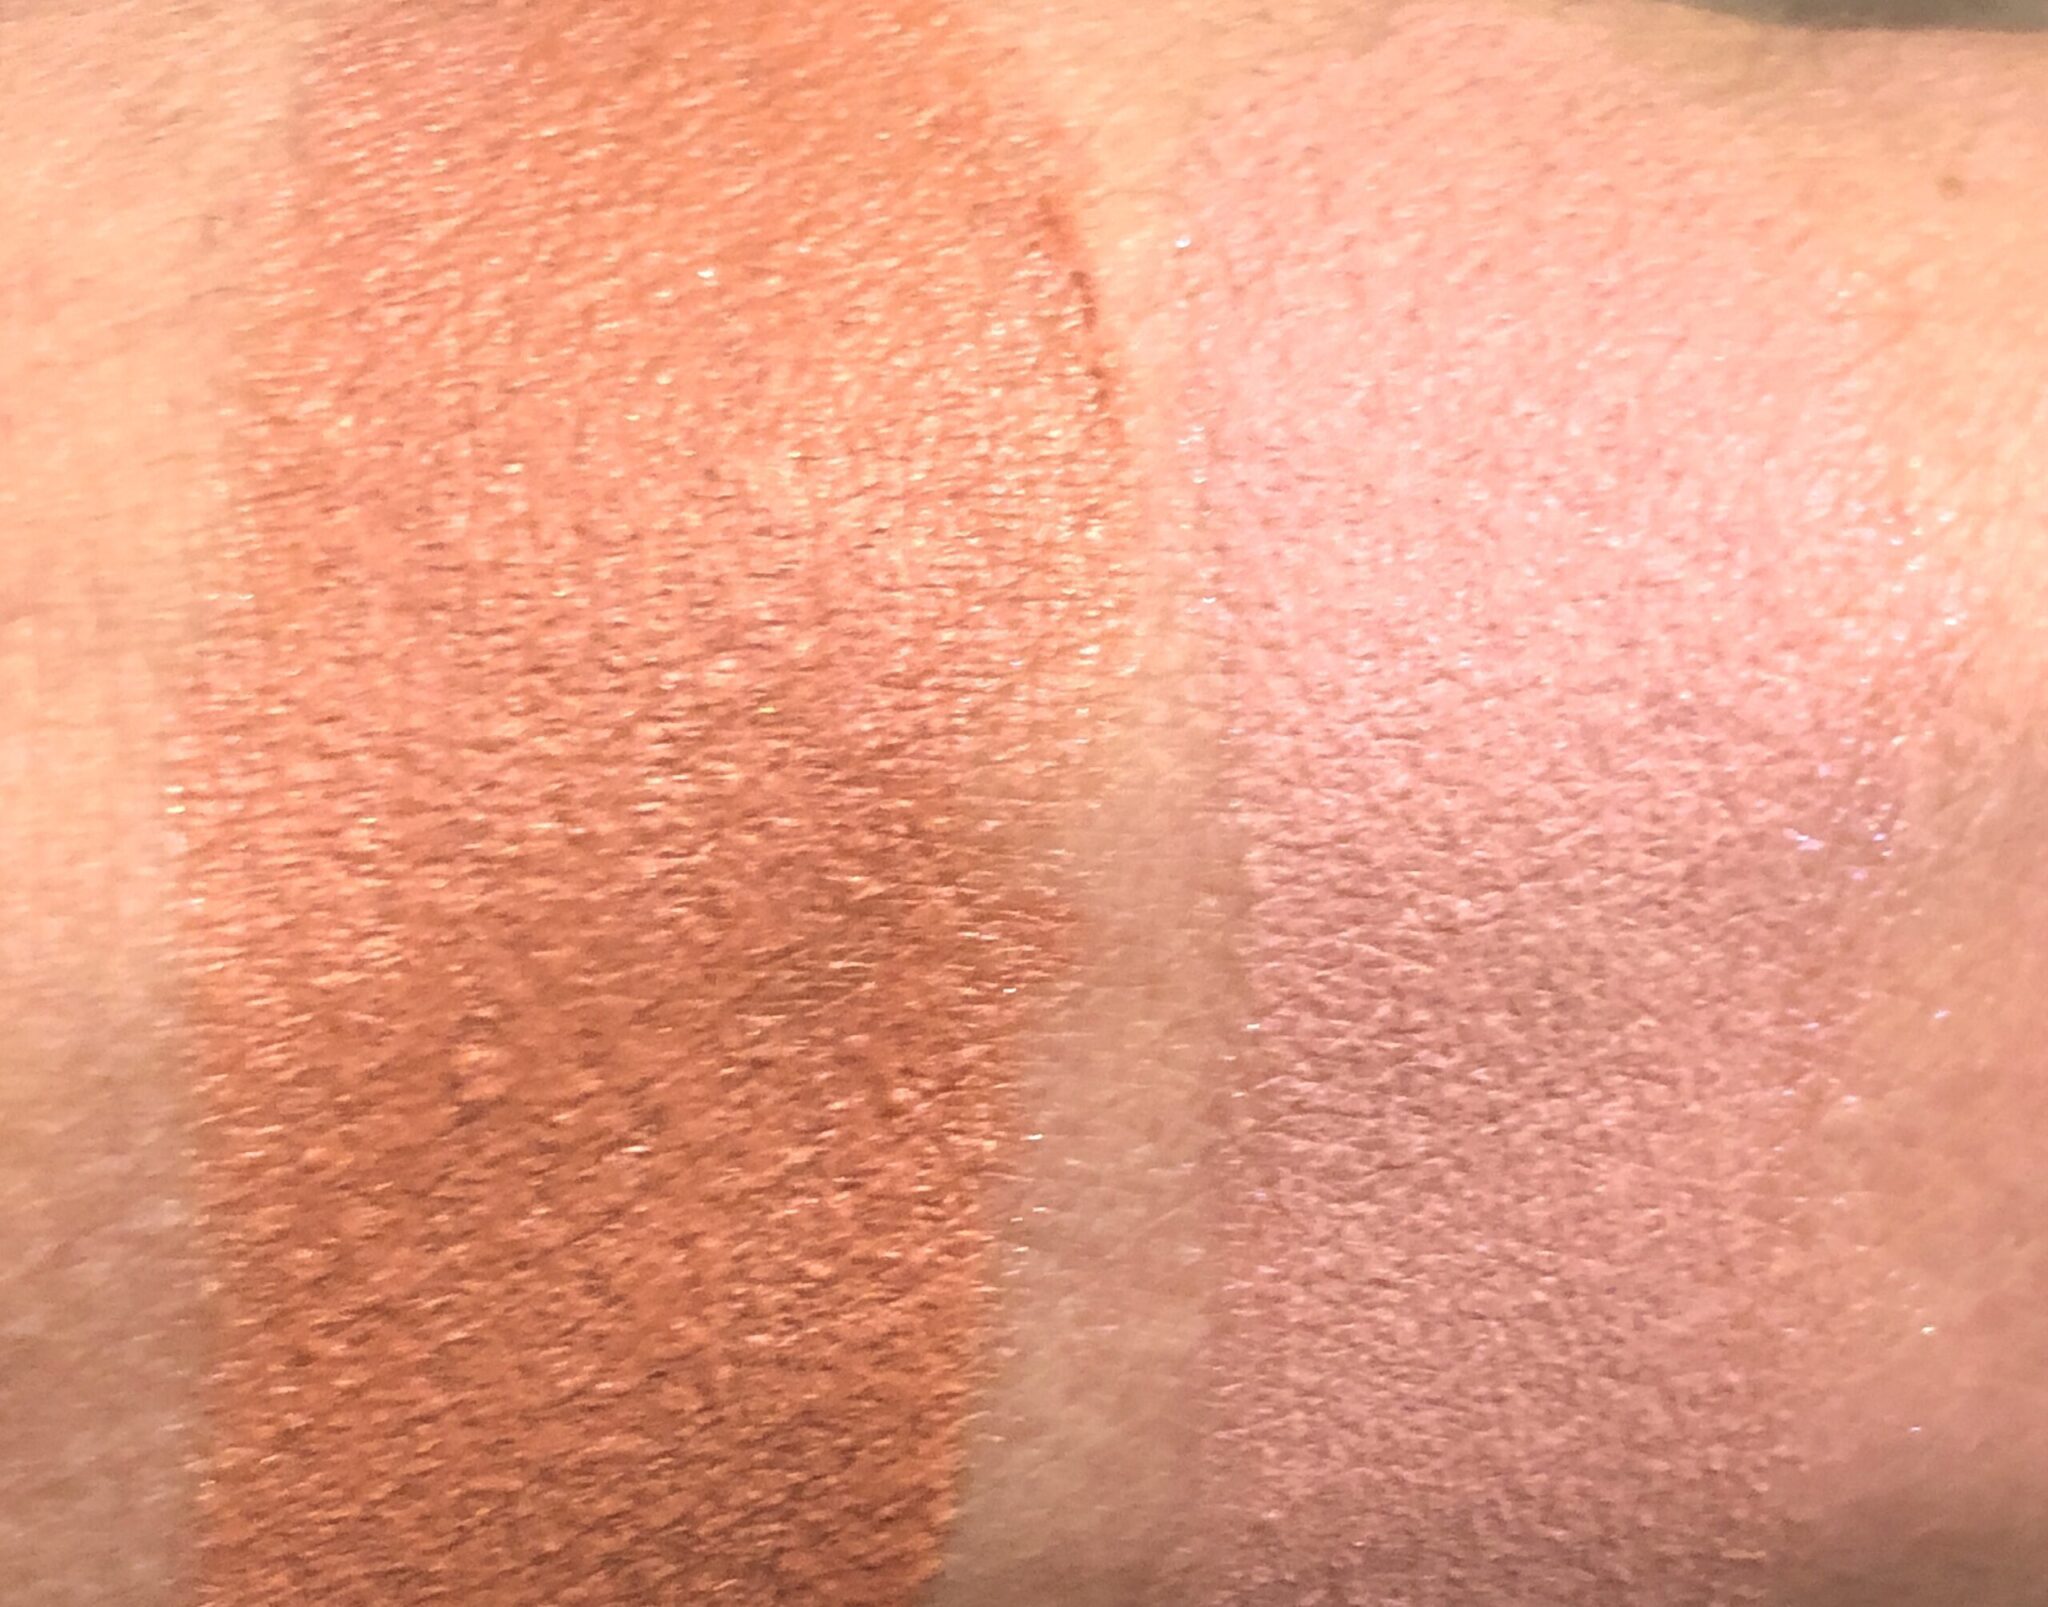 DAYCATION WHIPPED BLUSH SWATCHES, ON THE LEFT IS MELON MOJITO,ON THE RIGHT IS WATERMELON MARG